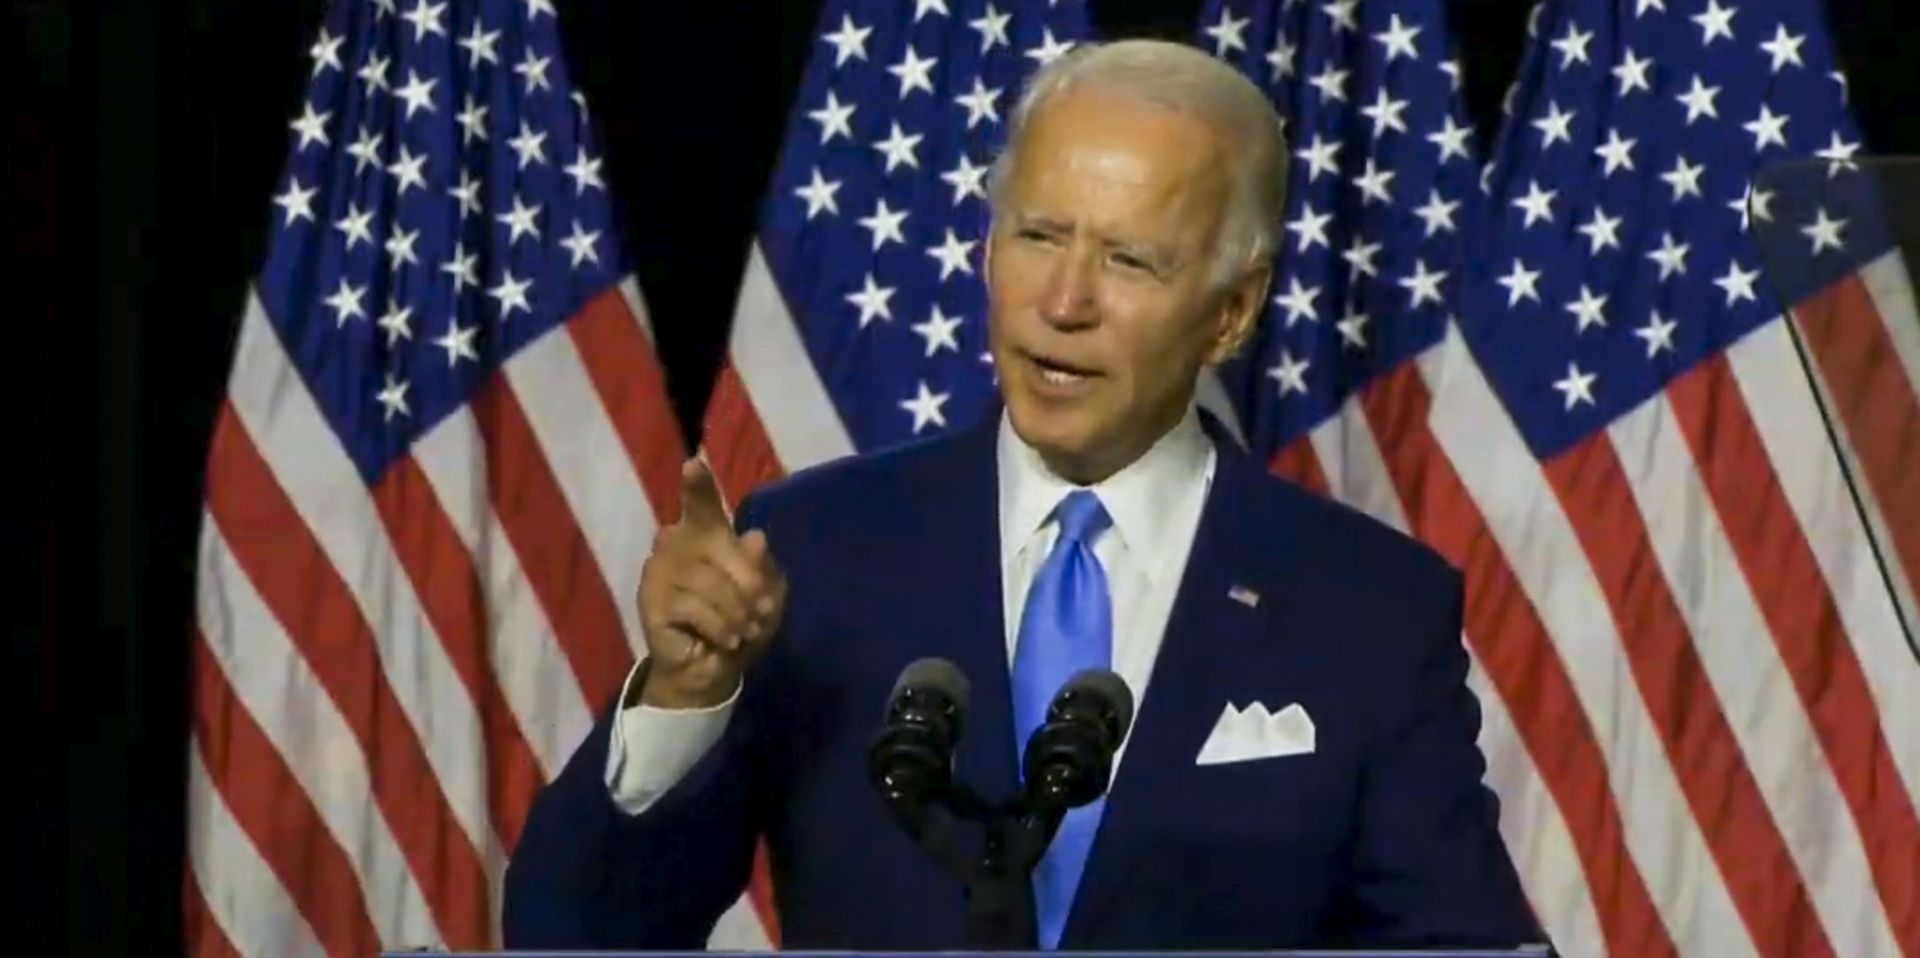 epa08600059 A frame grab image taken from the Biden Harris livestream feed shows former US Vice President and presumptive Democratic presidential nominee Joe Biden speaking during his introduction of California Senator Kamala Harris as his running mate in Wilmington, Delaware, USA, 12 August 2020.  EPA/USA BIDEN HARRIS HANDOUT  HANDOUT EDITORIAL USE ONLY/NO SALES